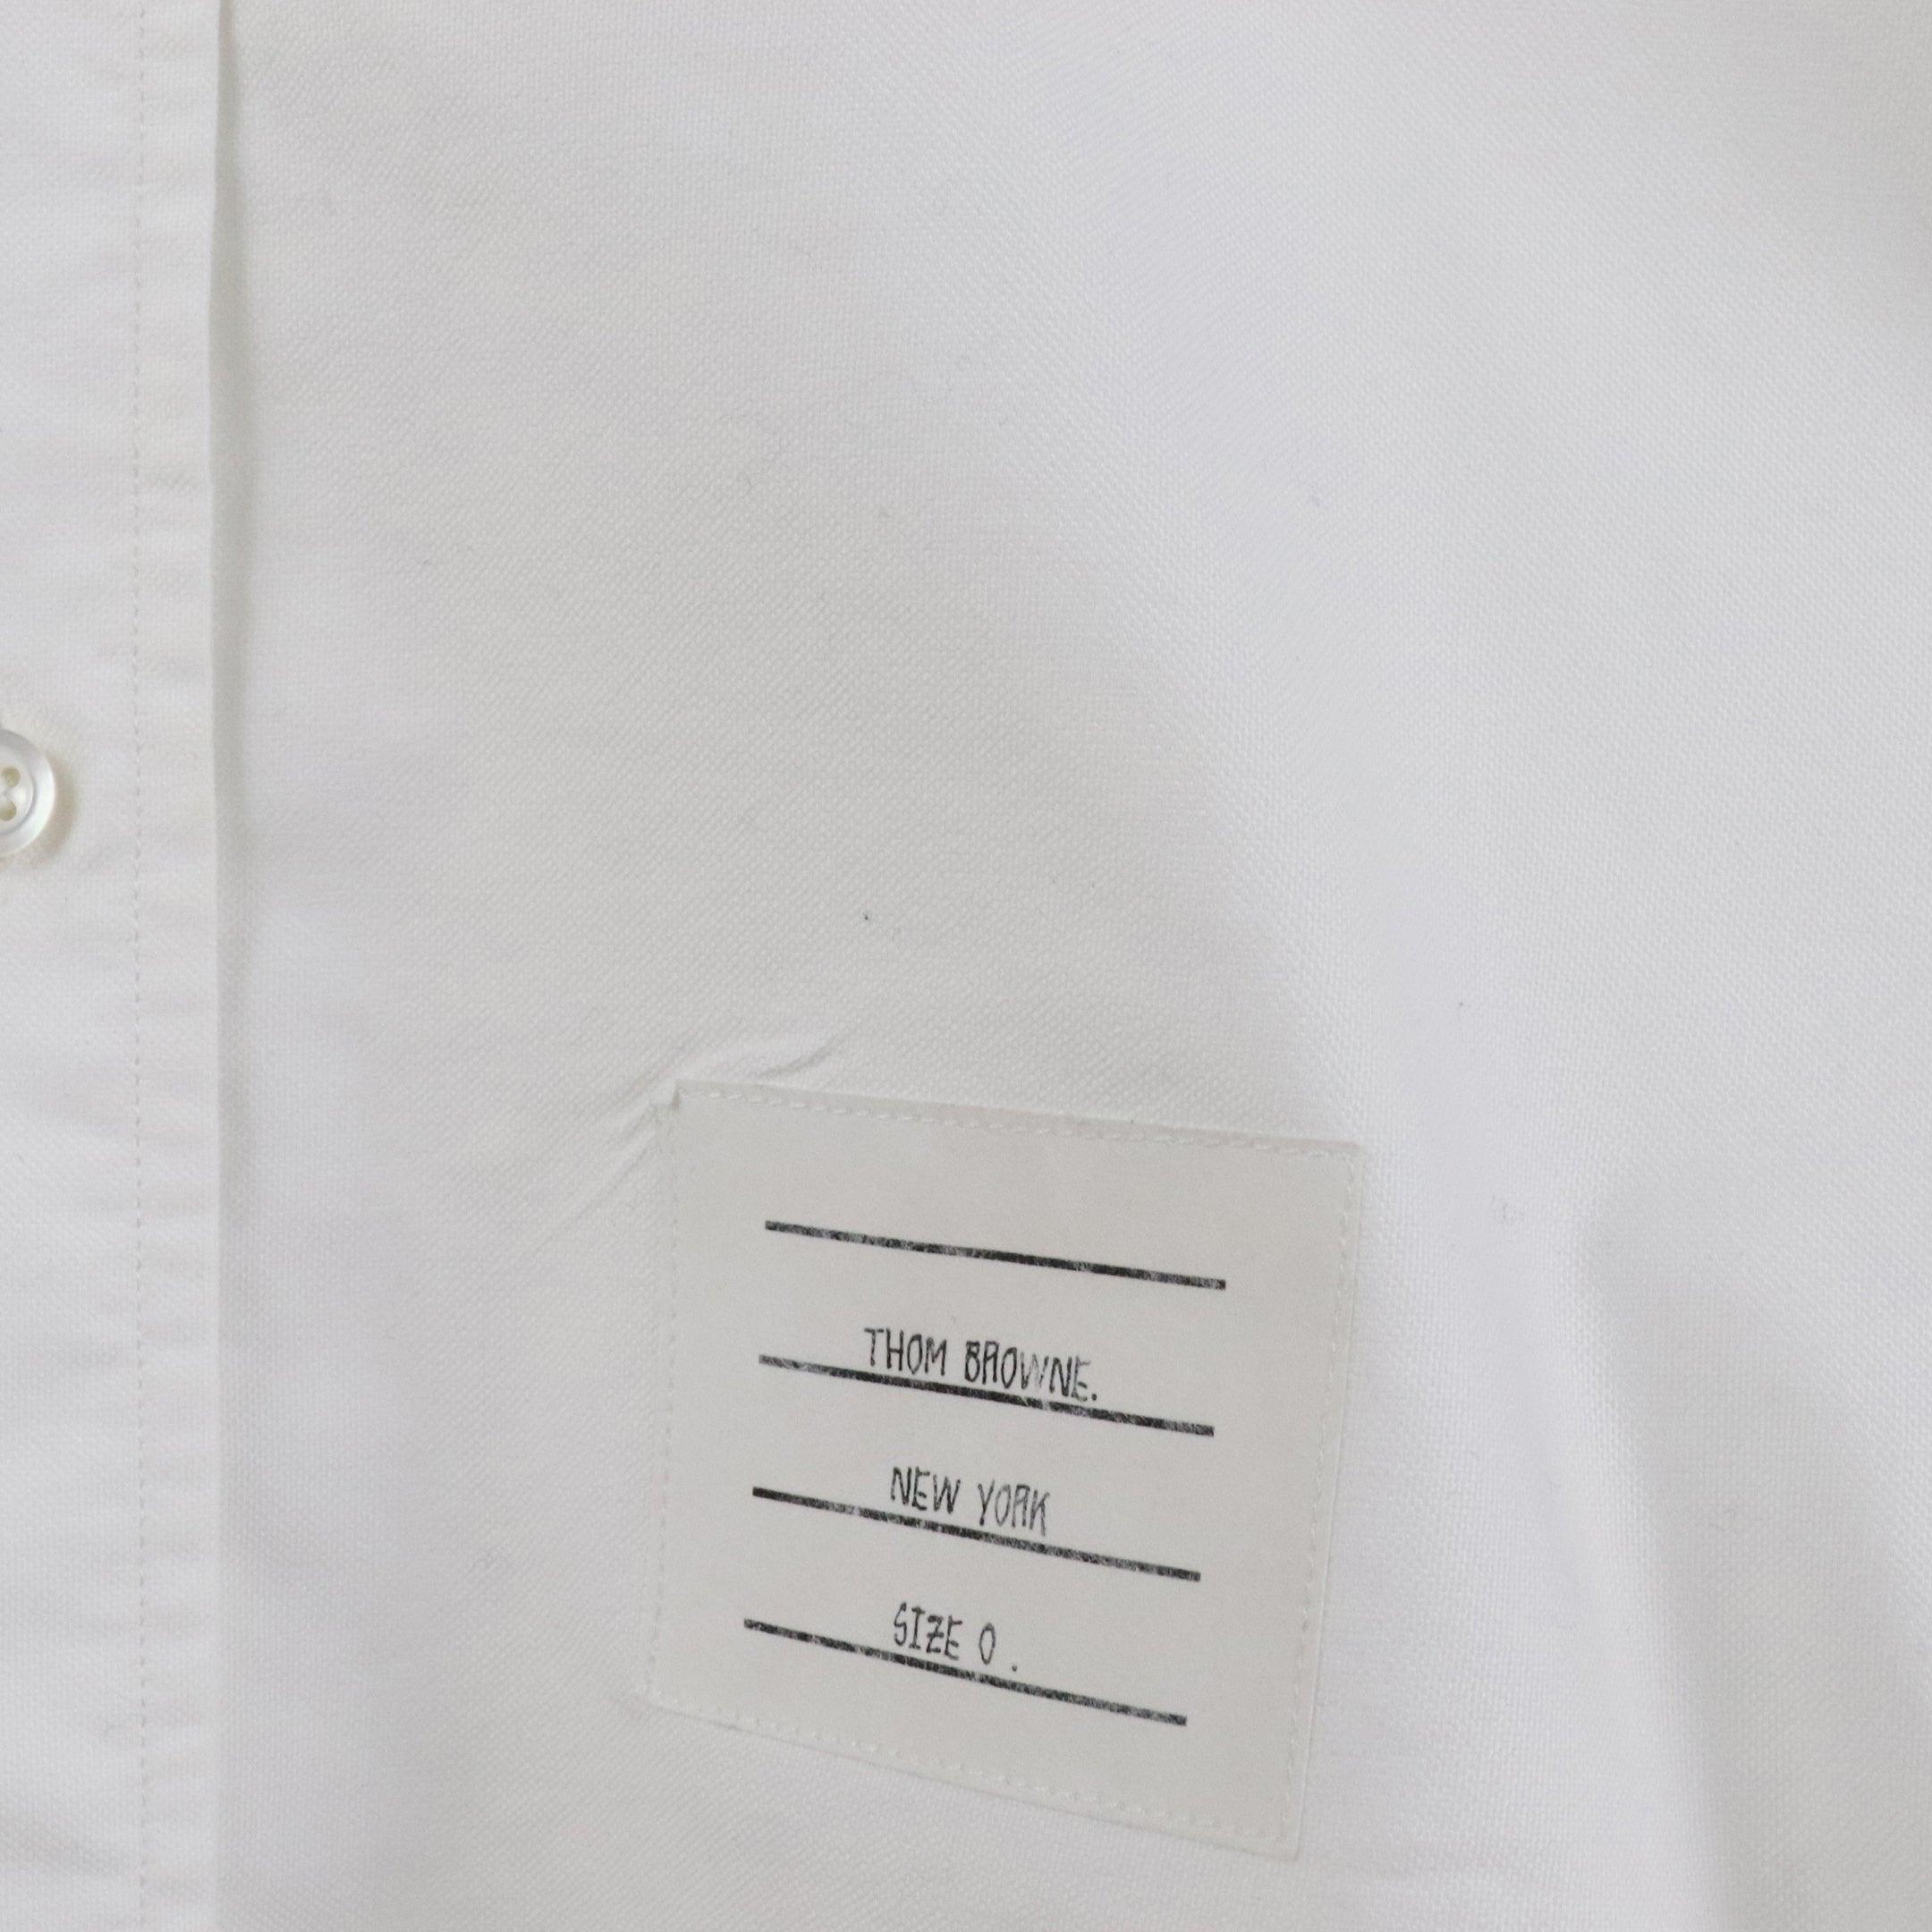 Thom Browne Shirt - Women's 0 - Fashionably Yours